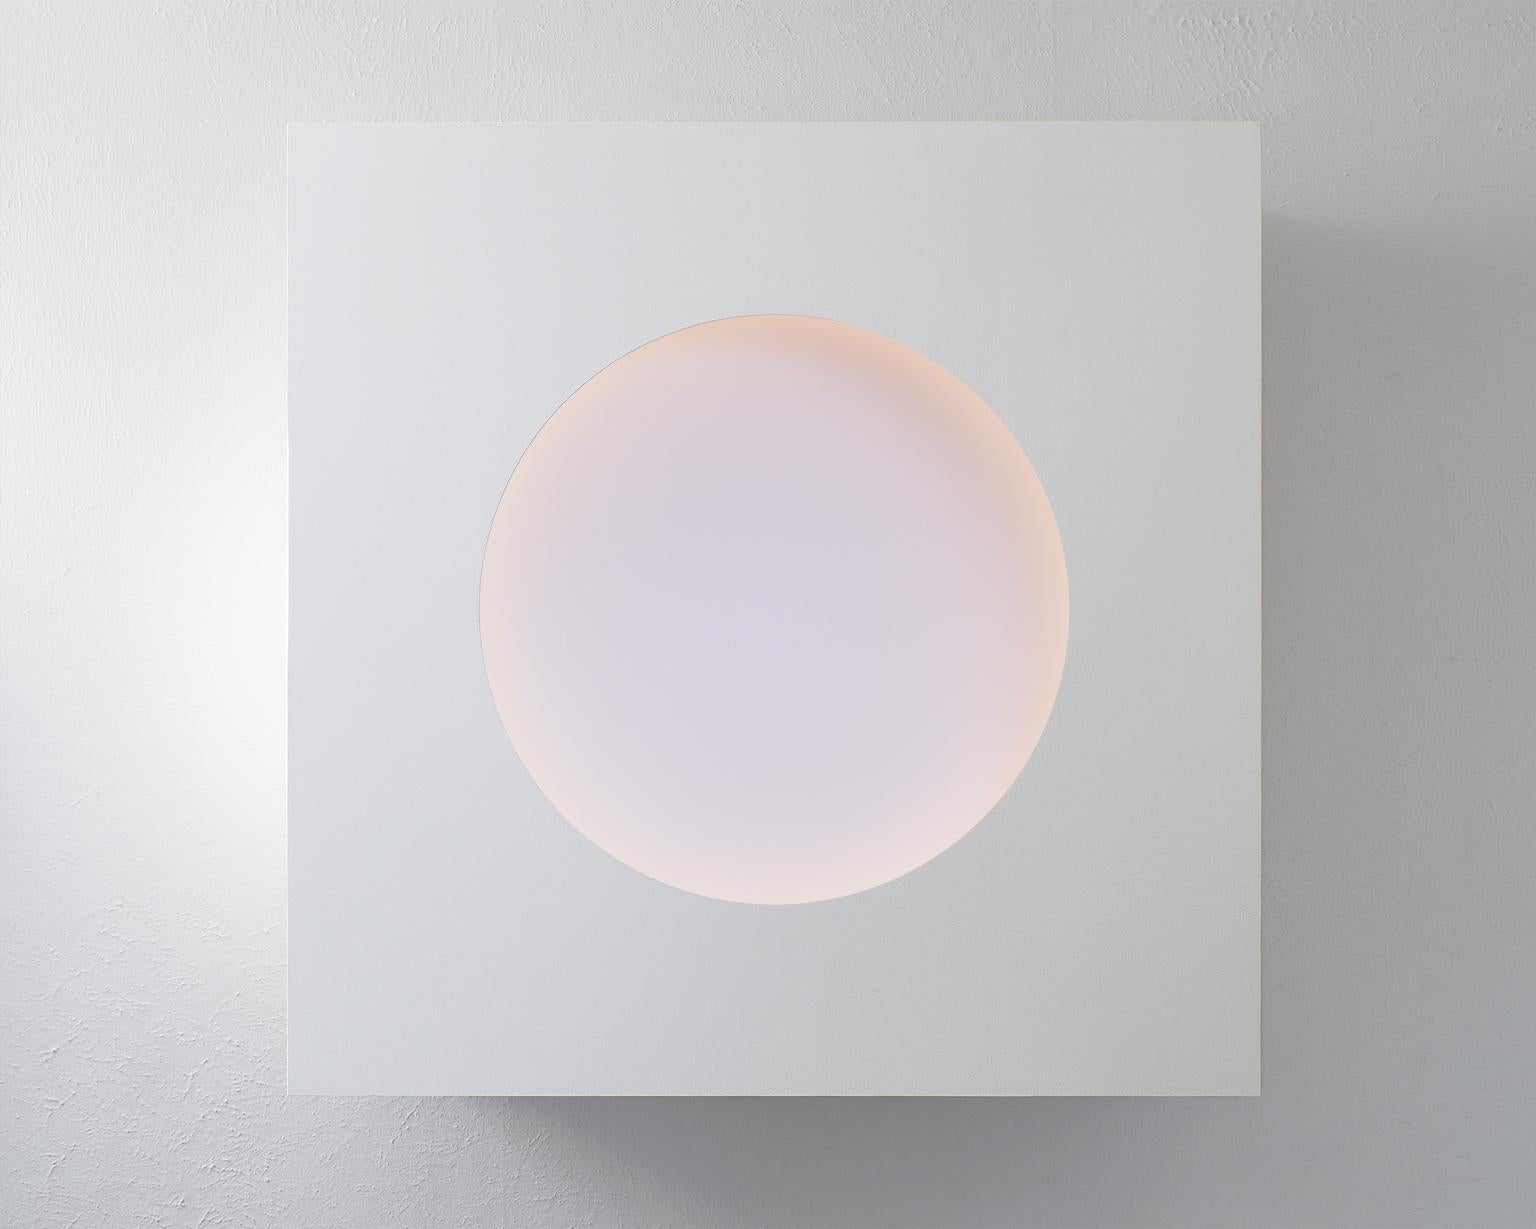 Raymond Graber‘s celestial light sculptures transform the sense of perception, challenging the human eye’s sense for scale and time with a transcendental perceptual experience. 

In an ethereal interplay between light and space, Graber’s light